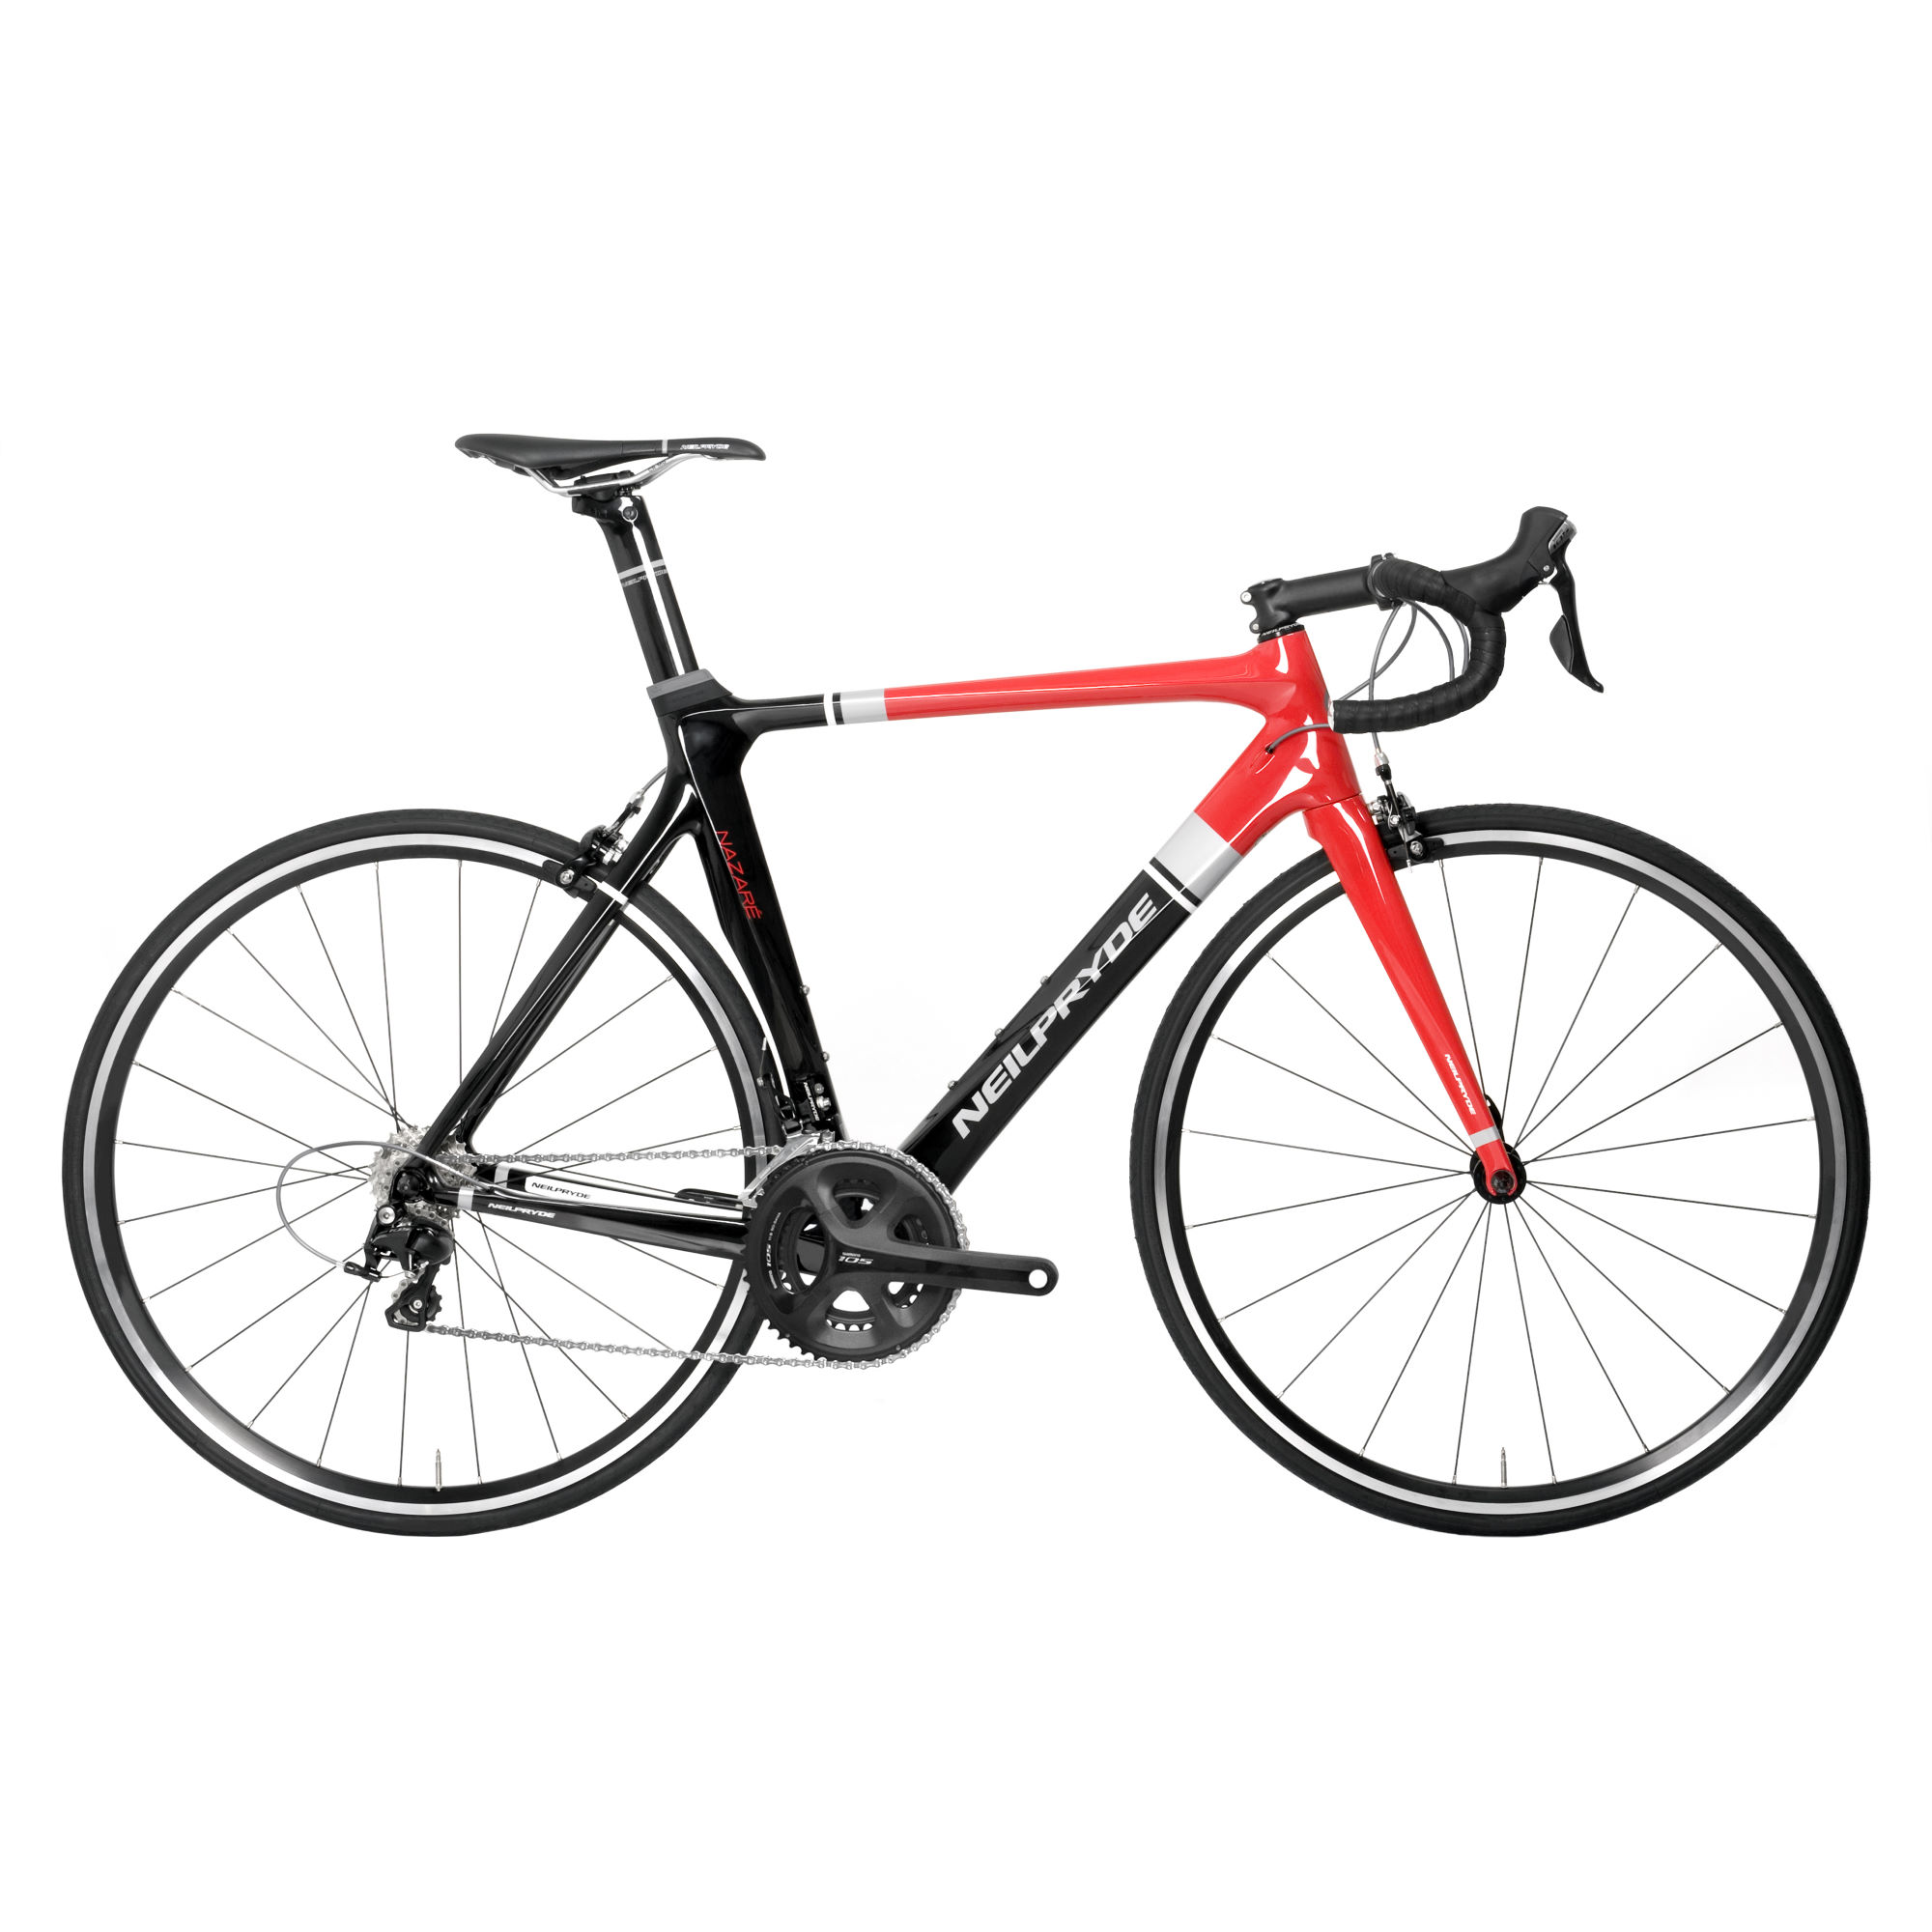 neilpryde-nazare-105-2016-road-bike-road-bikes-red-black-clearance-ecne1051236800m-1